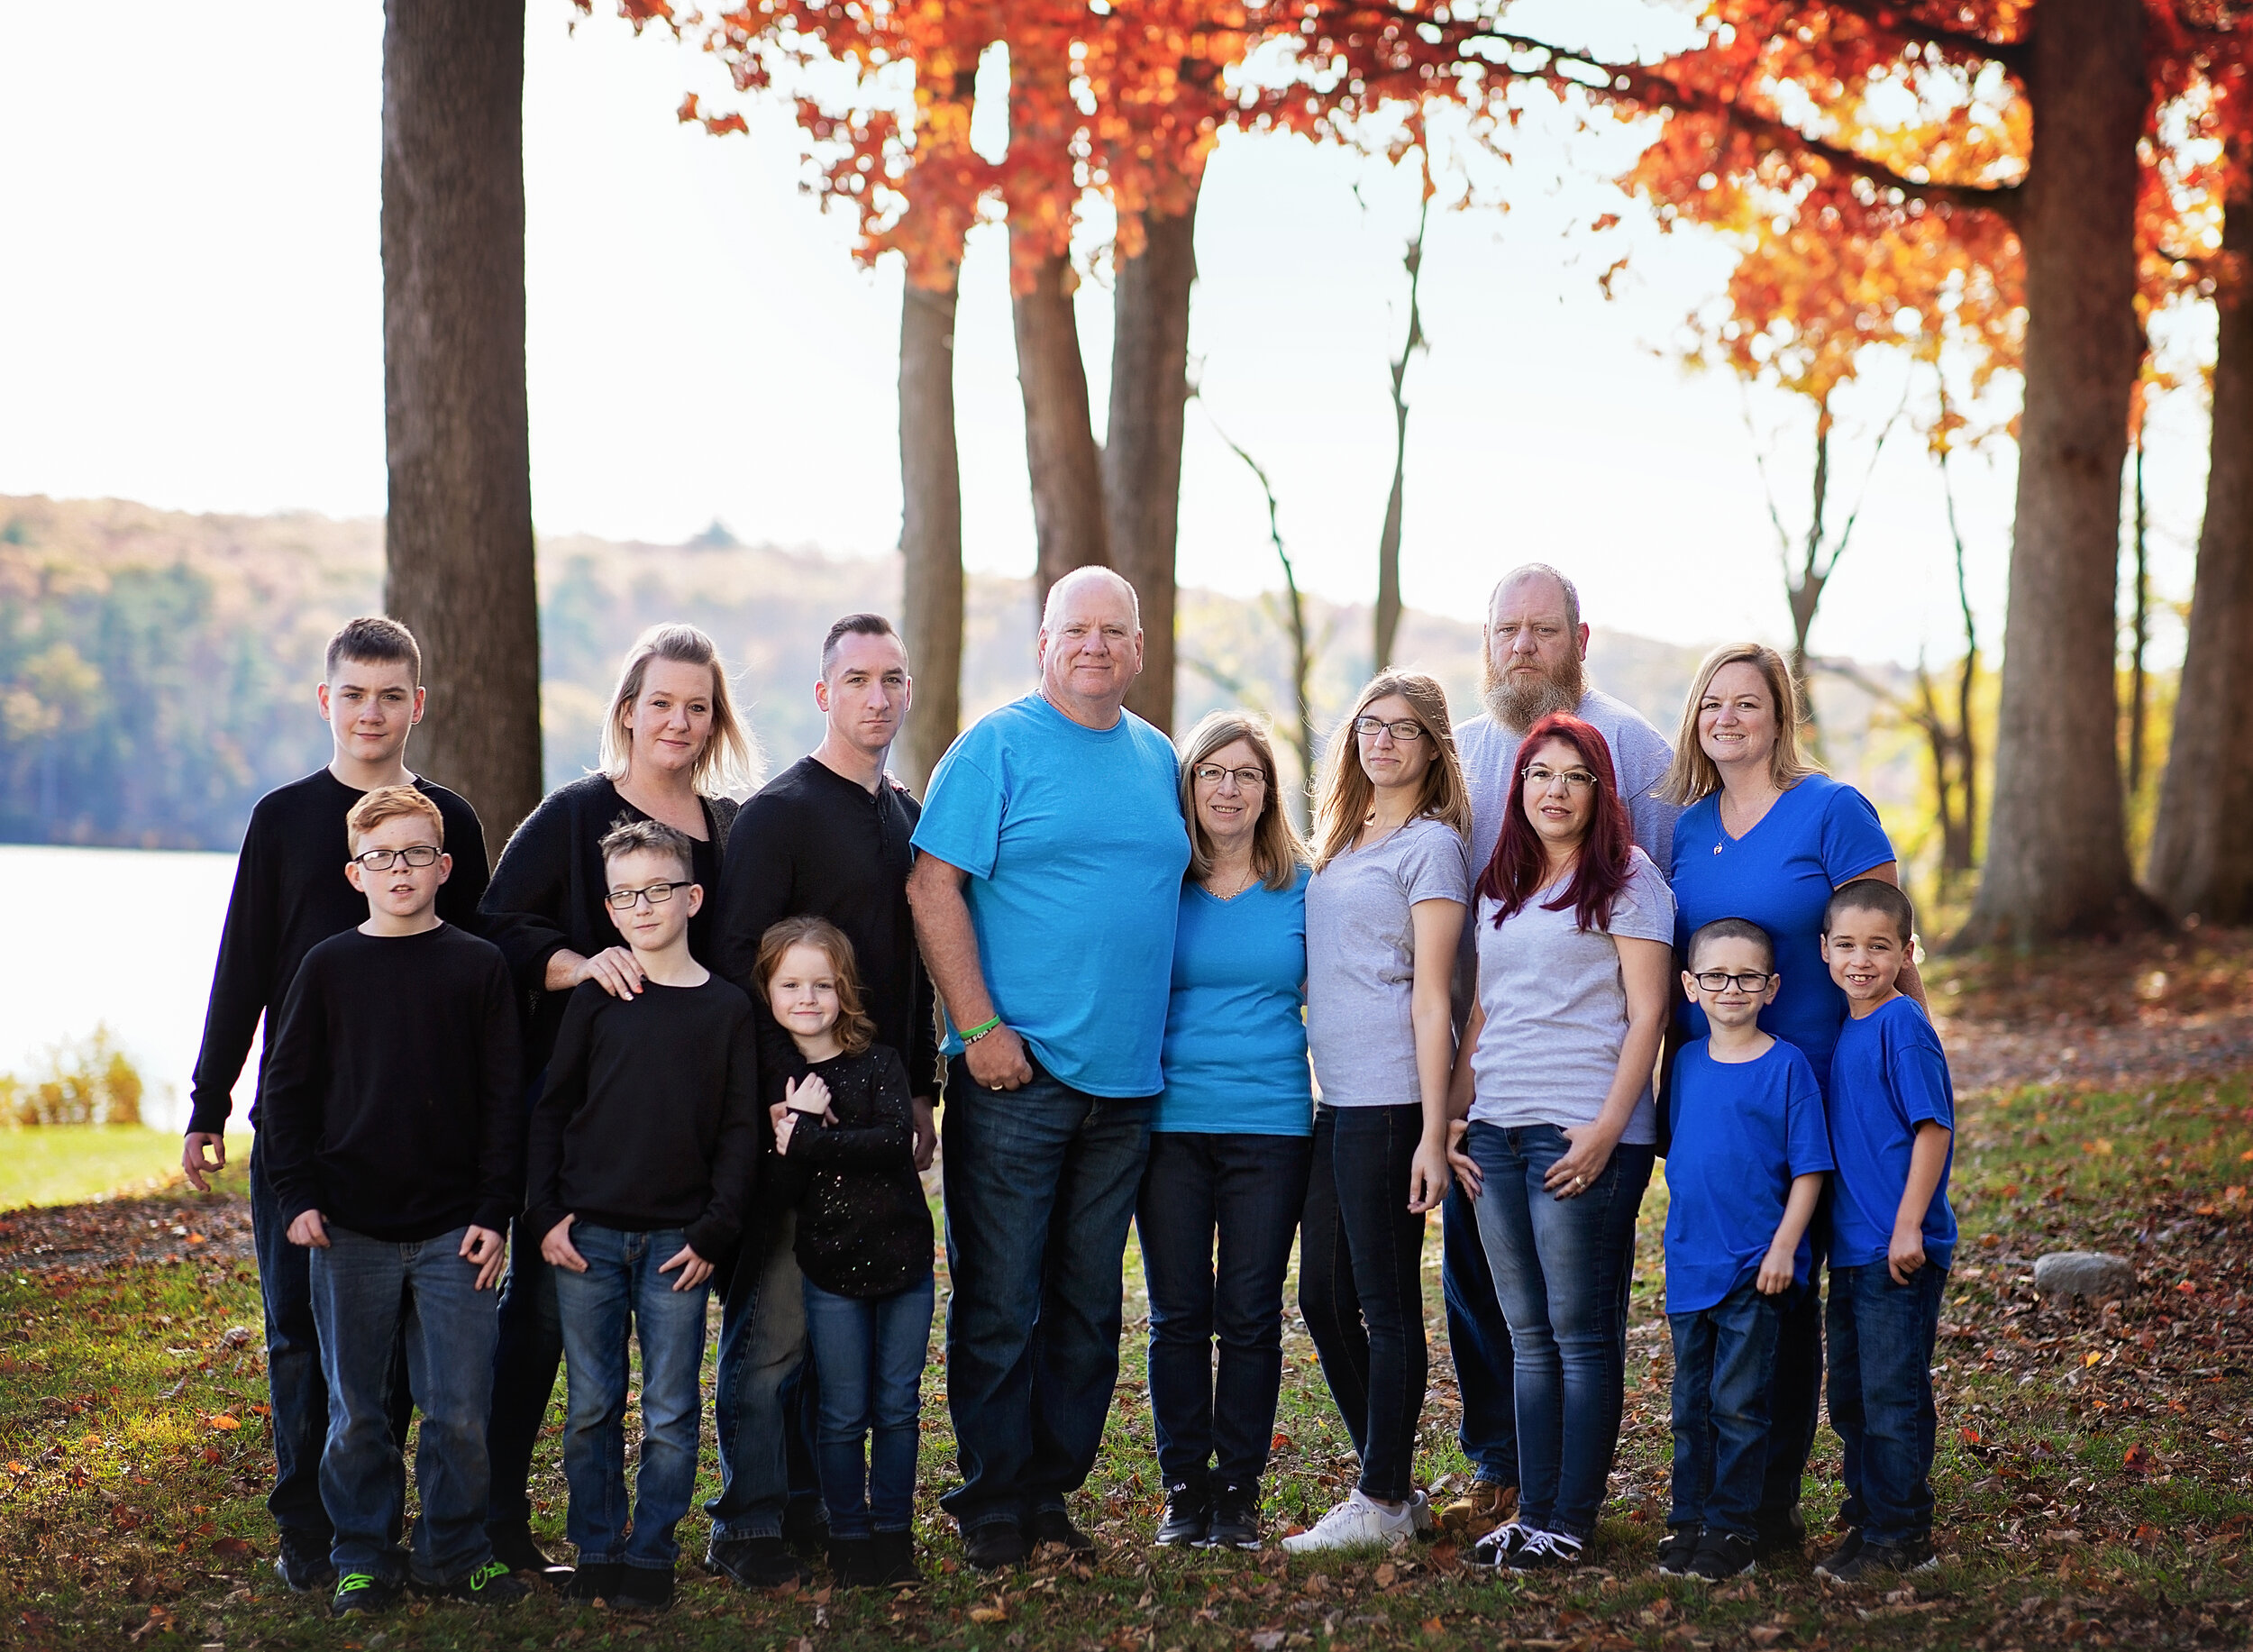  Extended family portrait with beautiful fall foliage in the backdrop in North Jersey 